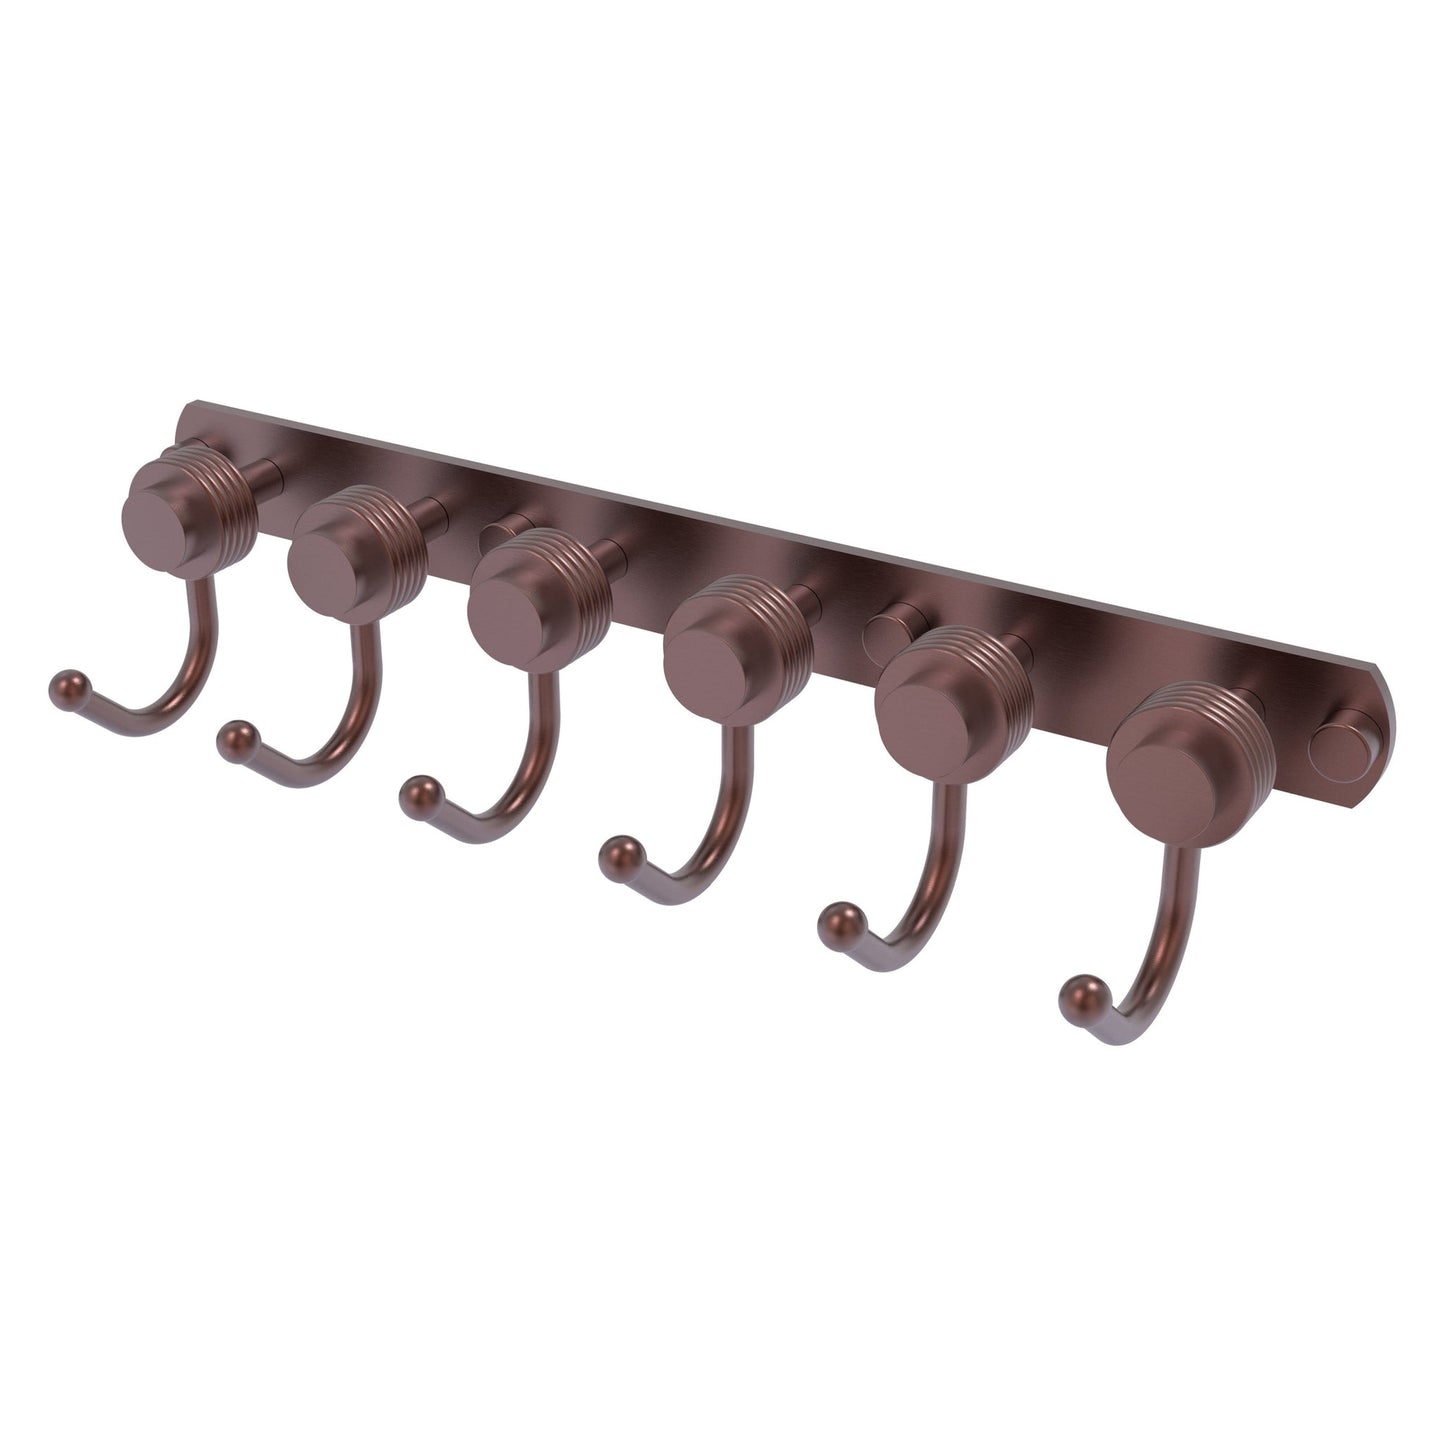 Allied Brass Mercury 15.5" x 4" Antique Copper Solid Brass 6-Position Tie and Belt Rack With Grooved Accent